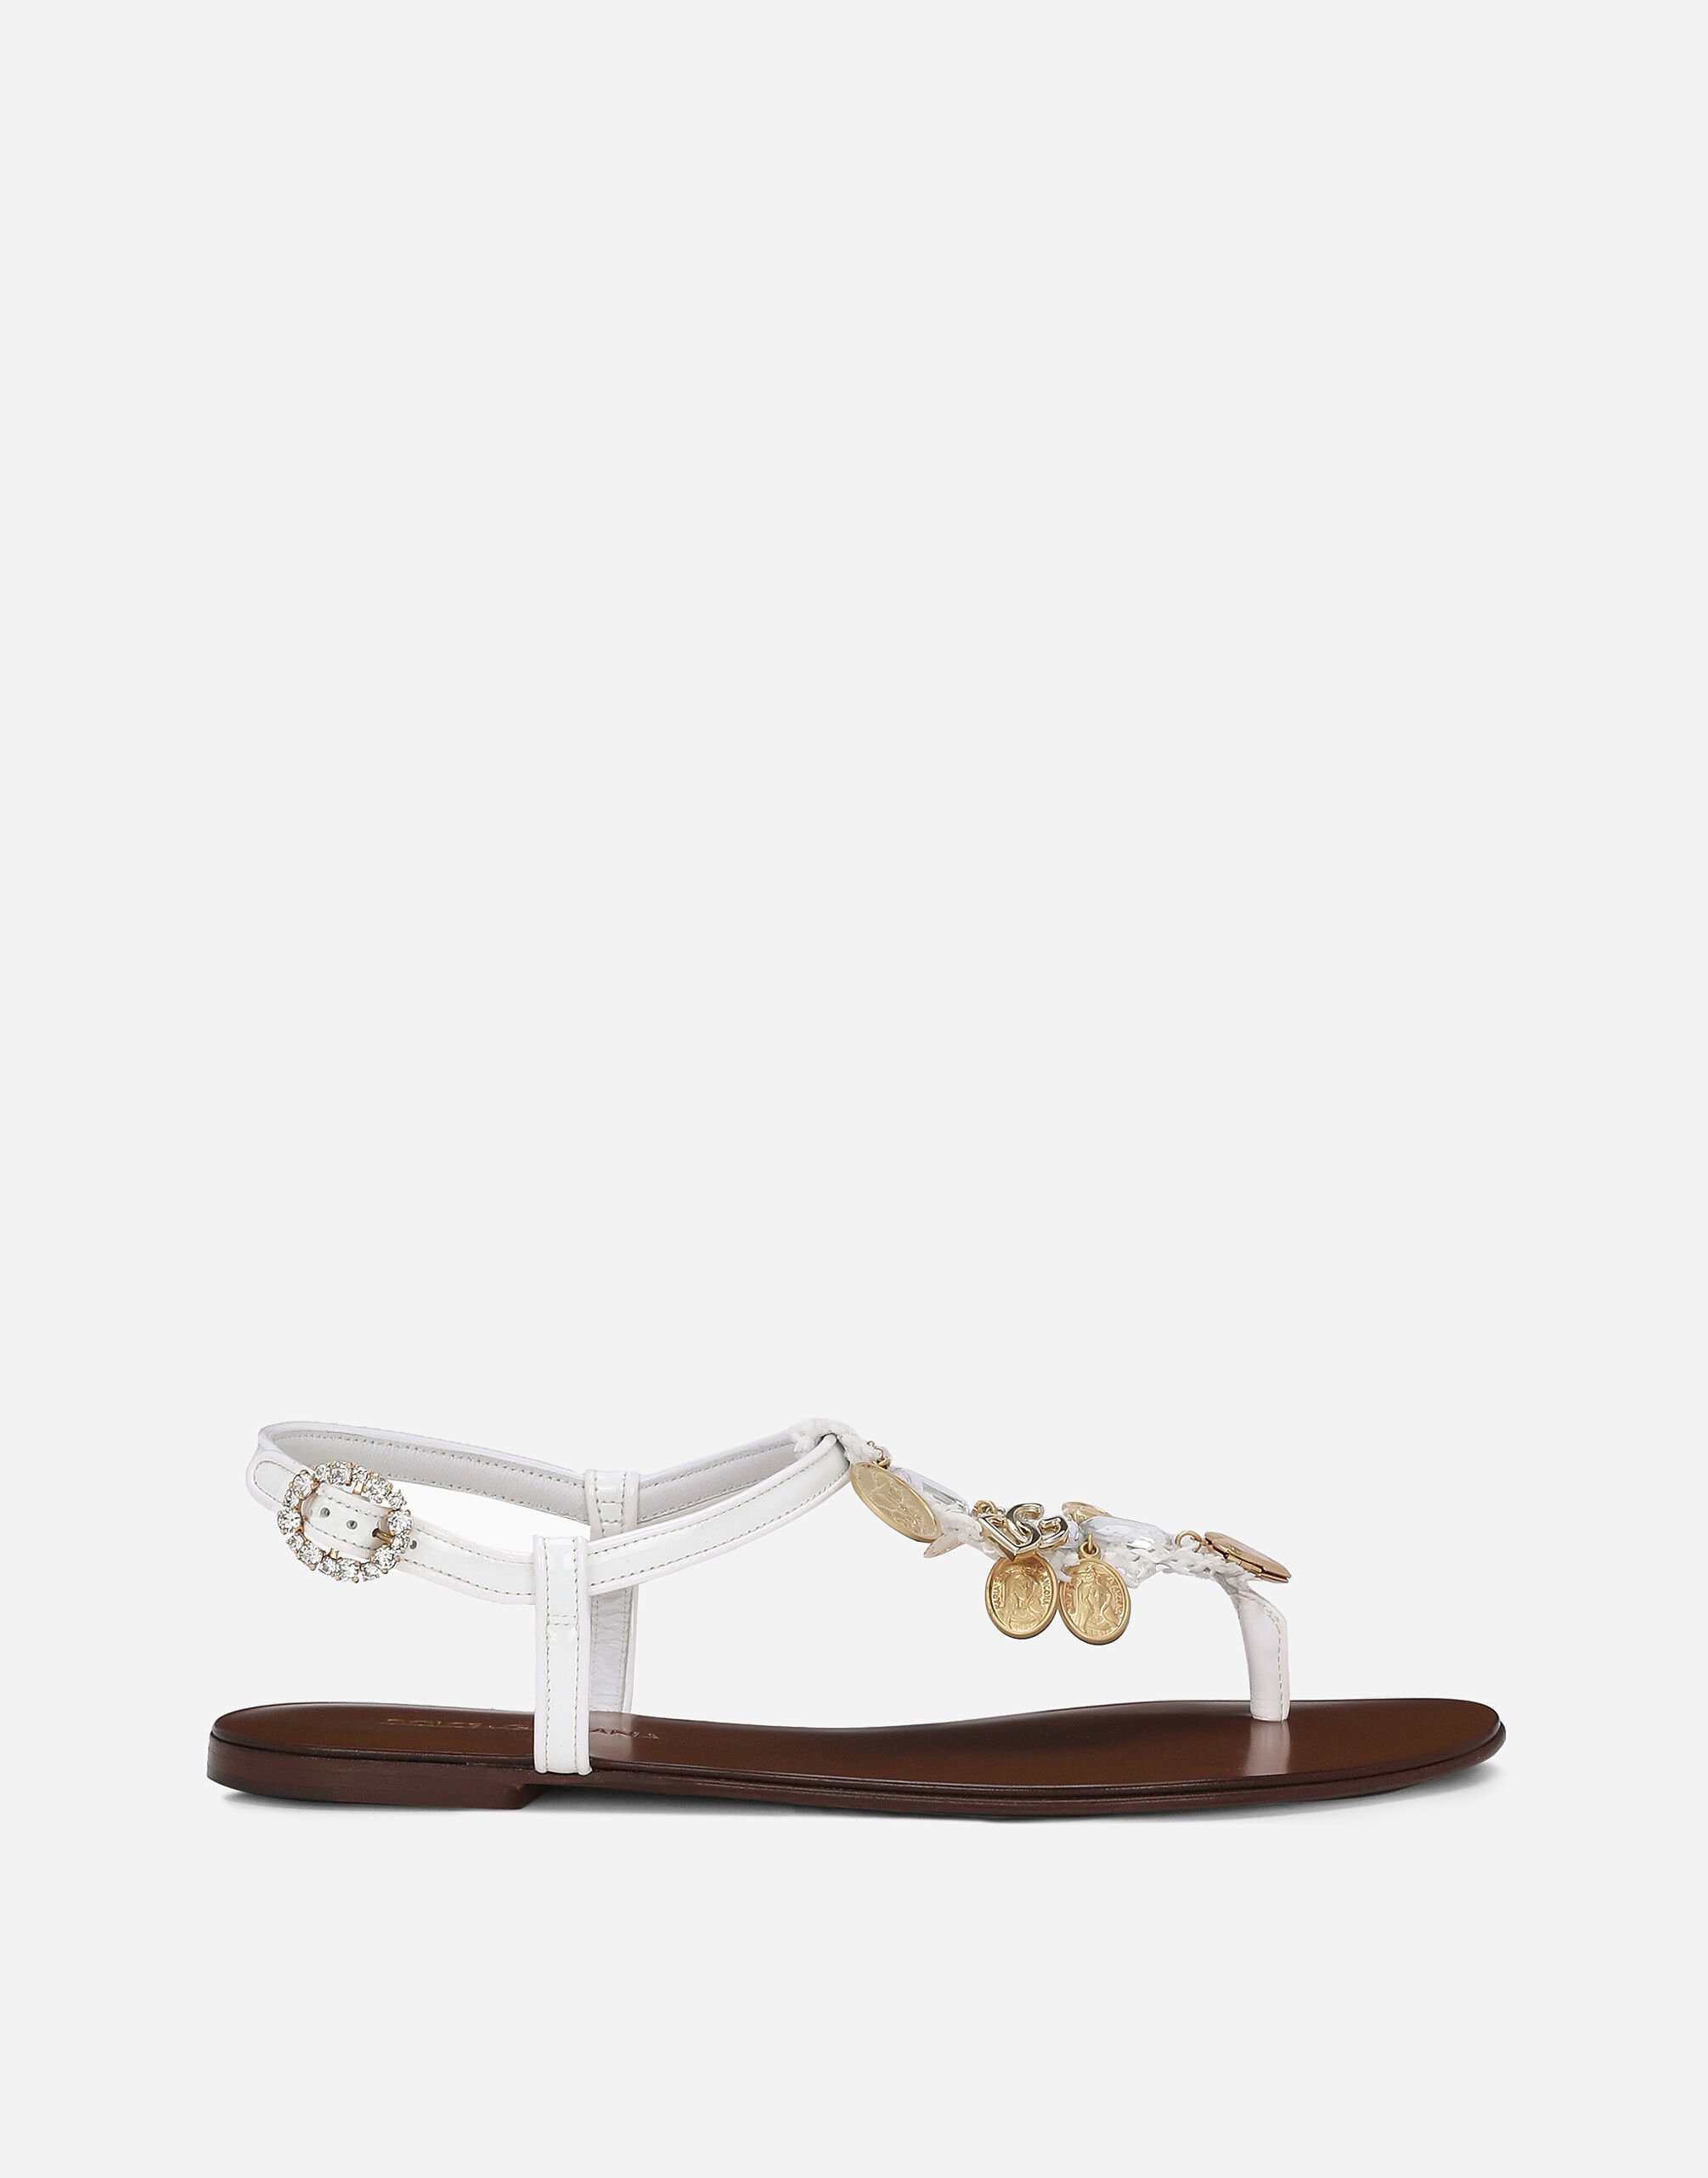 ${brand} Raffia thong sandals with embroidered votive medallions ${colorDescription} ${masterID}